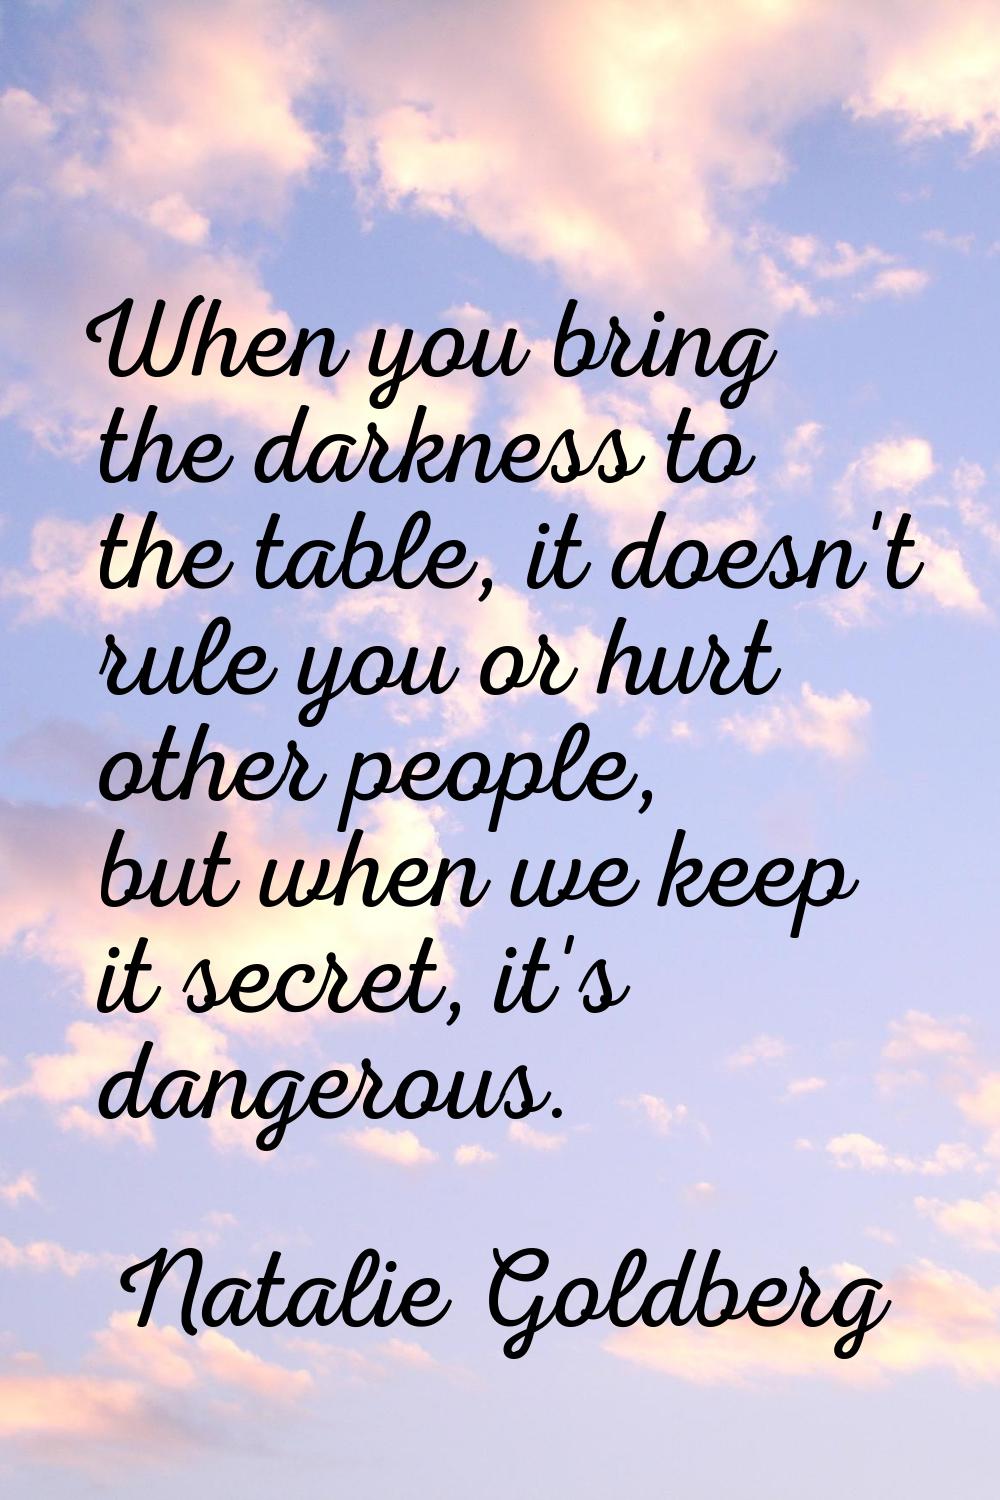 When you bring the darkness to the table, it doesn't rule you or hurt other people, but when we kee